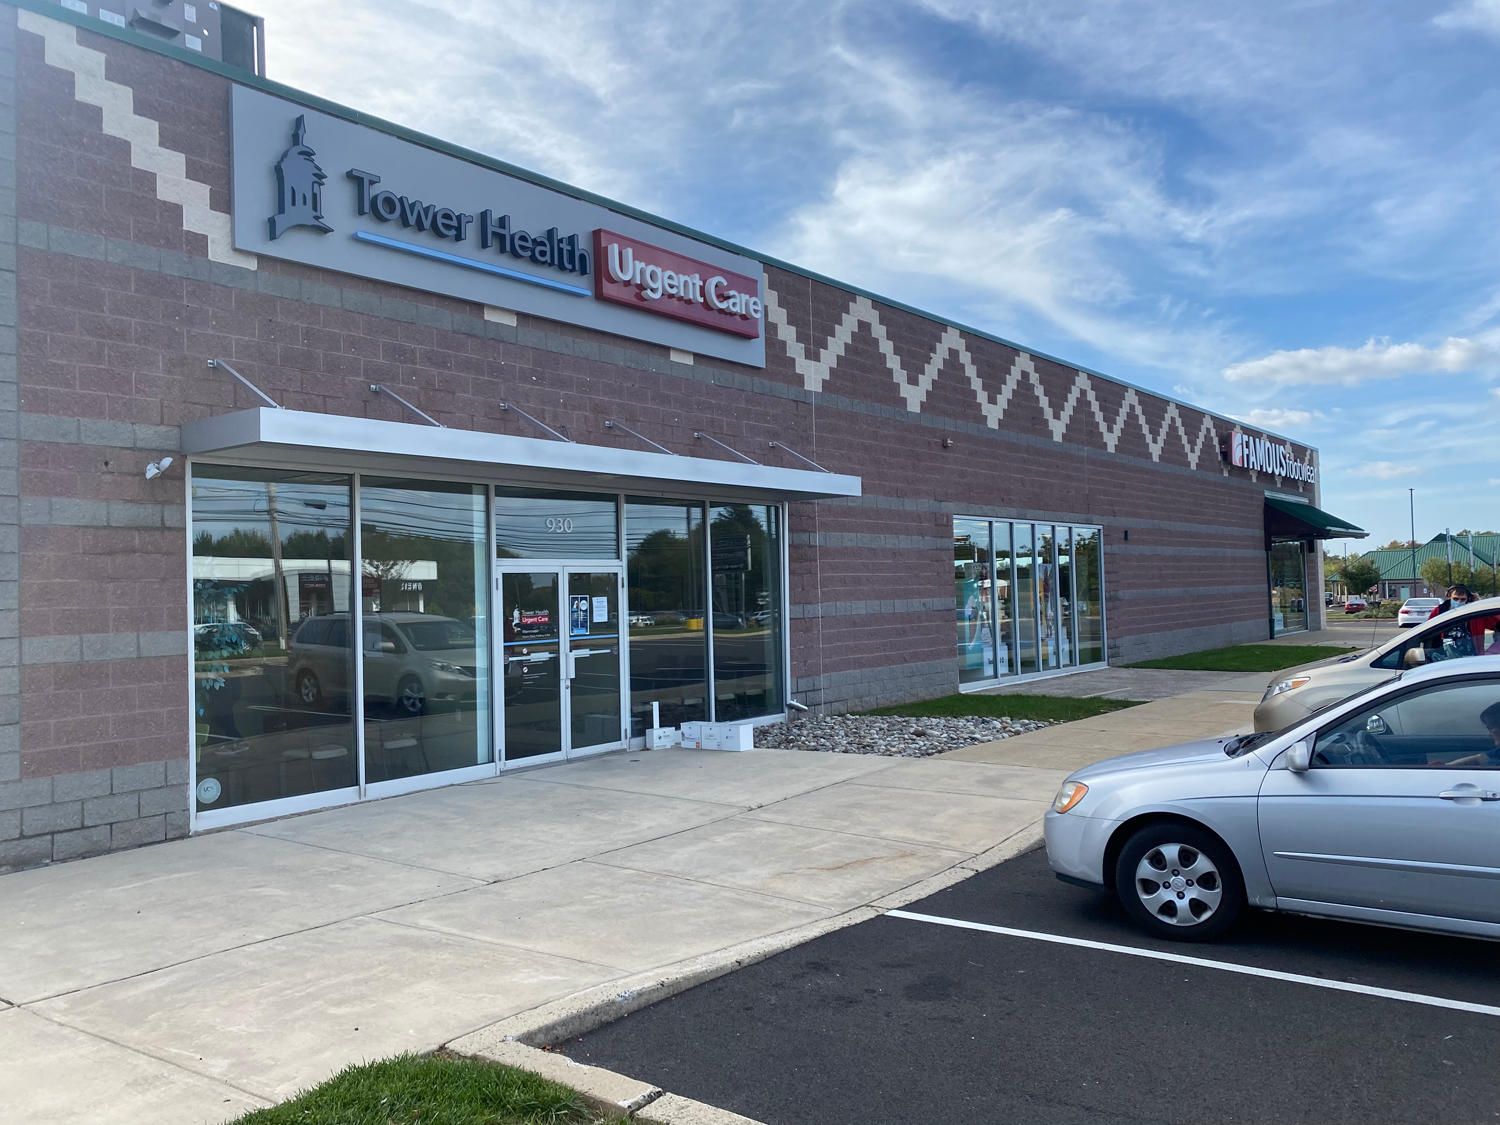 Tower Health Urgent Care at Warminster Towne Center Shopping Center